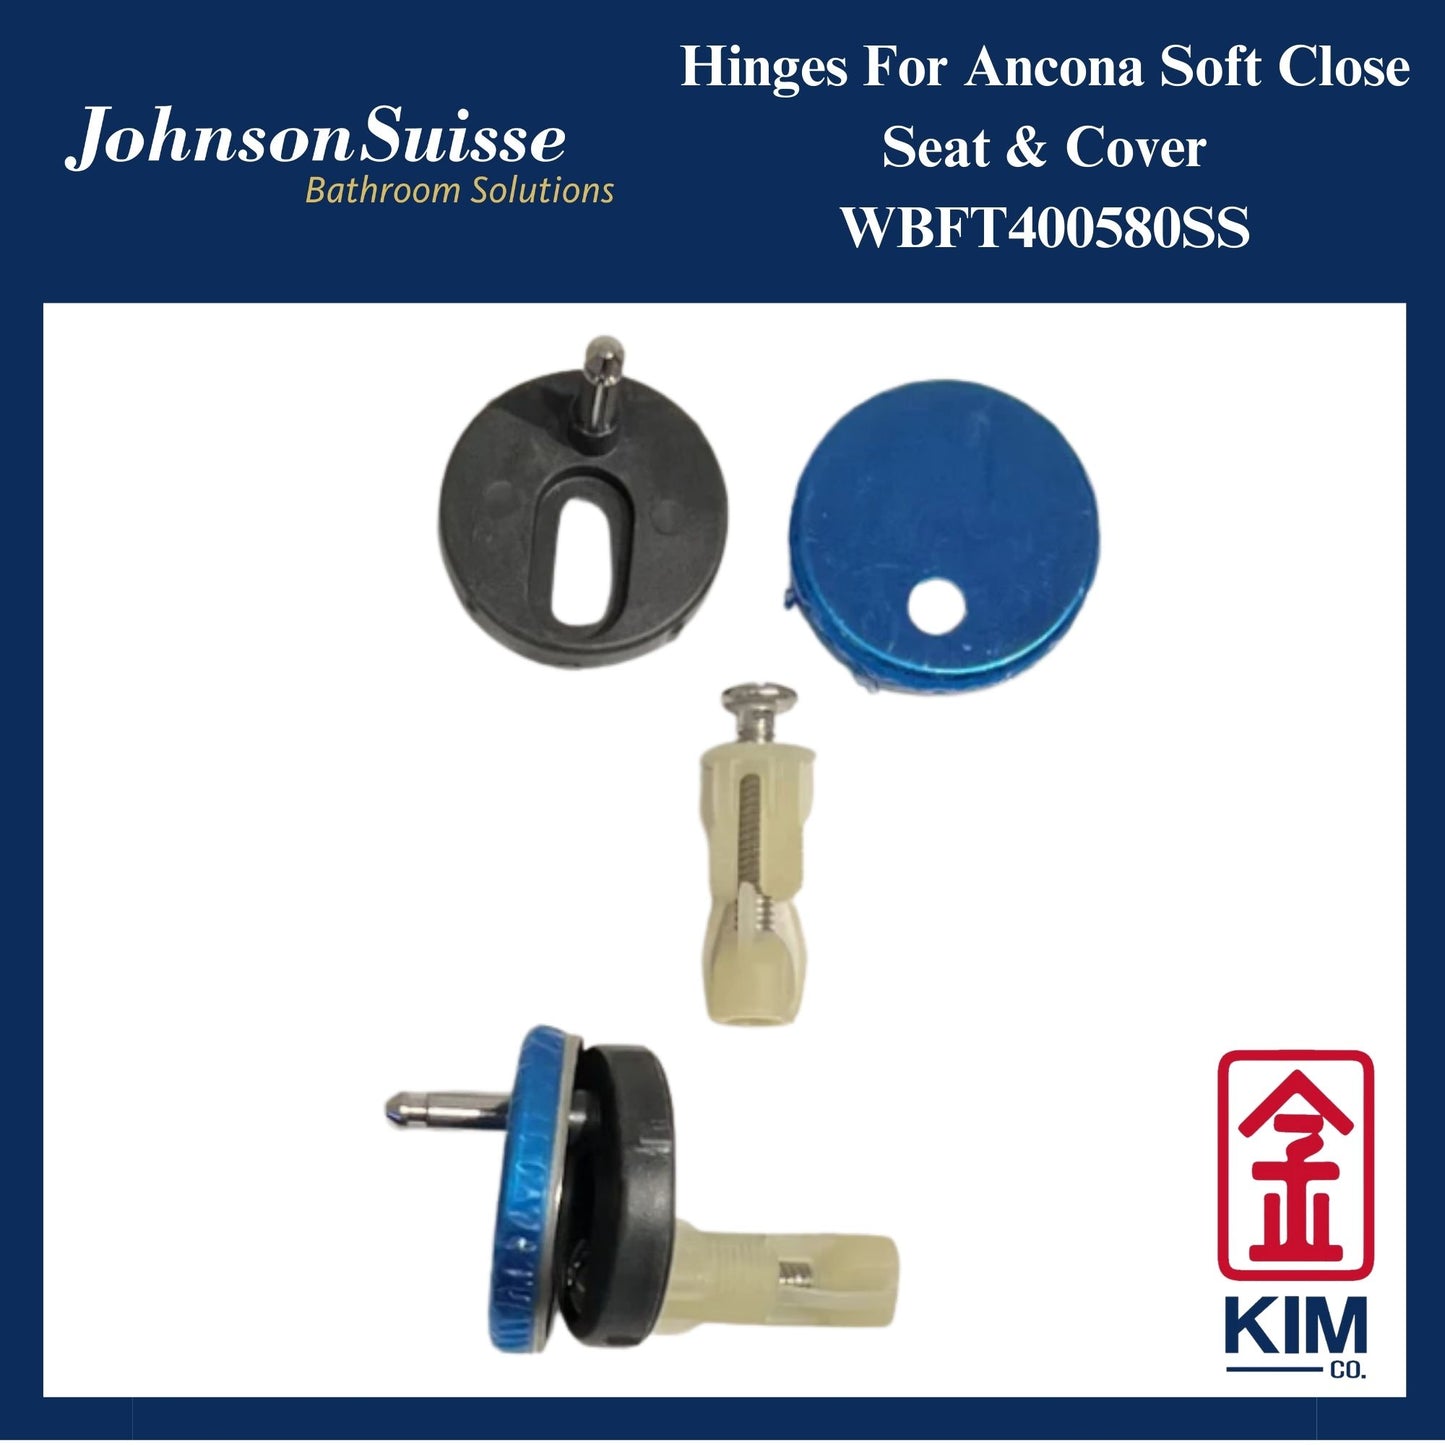 Johnson Suisse Hinges For Ancona Soft Close Seat & Cover (WBFT400580SS)